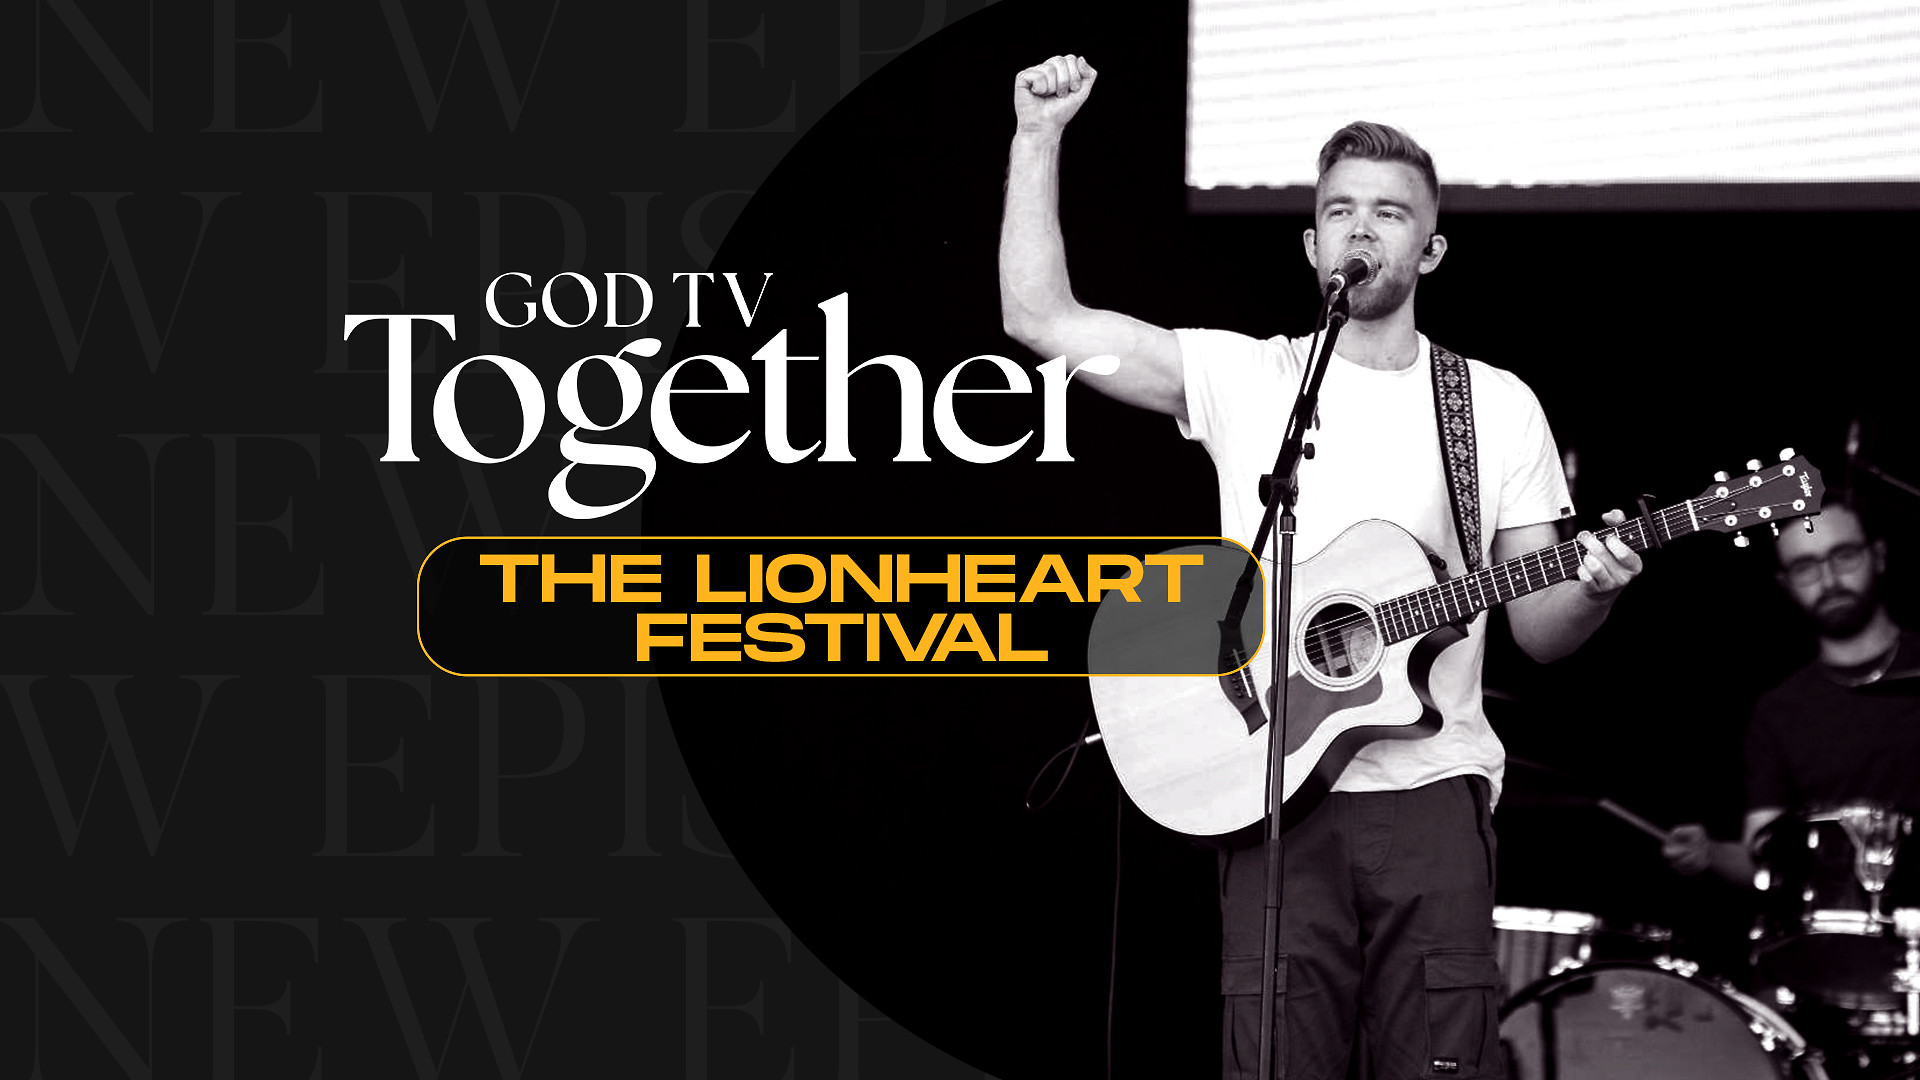 Lionheart Festival This Weekend